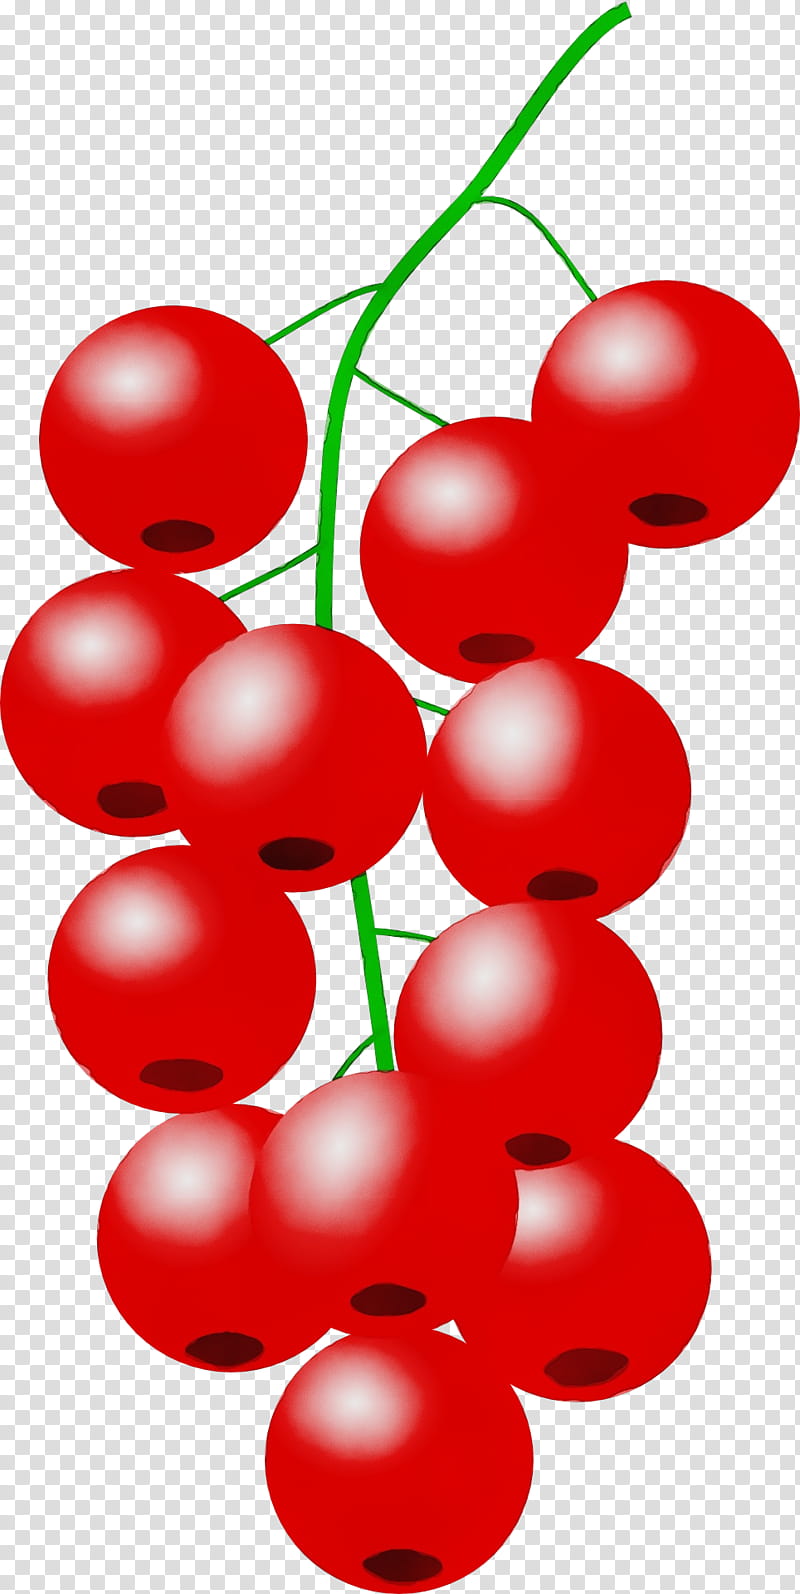 red currant fruit plant, Watercolor, Paint, Wet Ink, Seedless Fruit, Berry, Lingonberry, Cherry transparent background PNG clipart